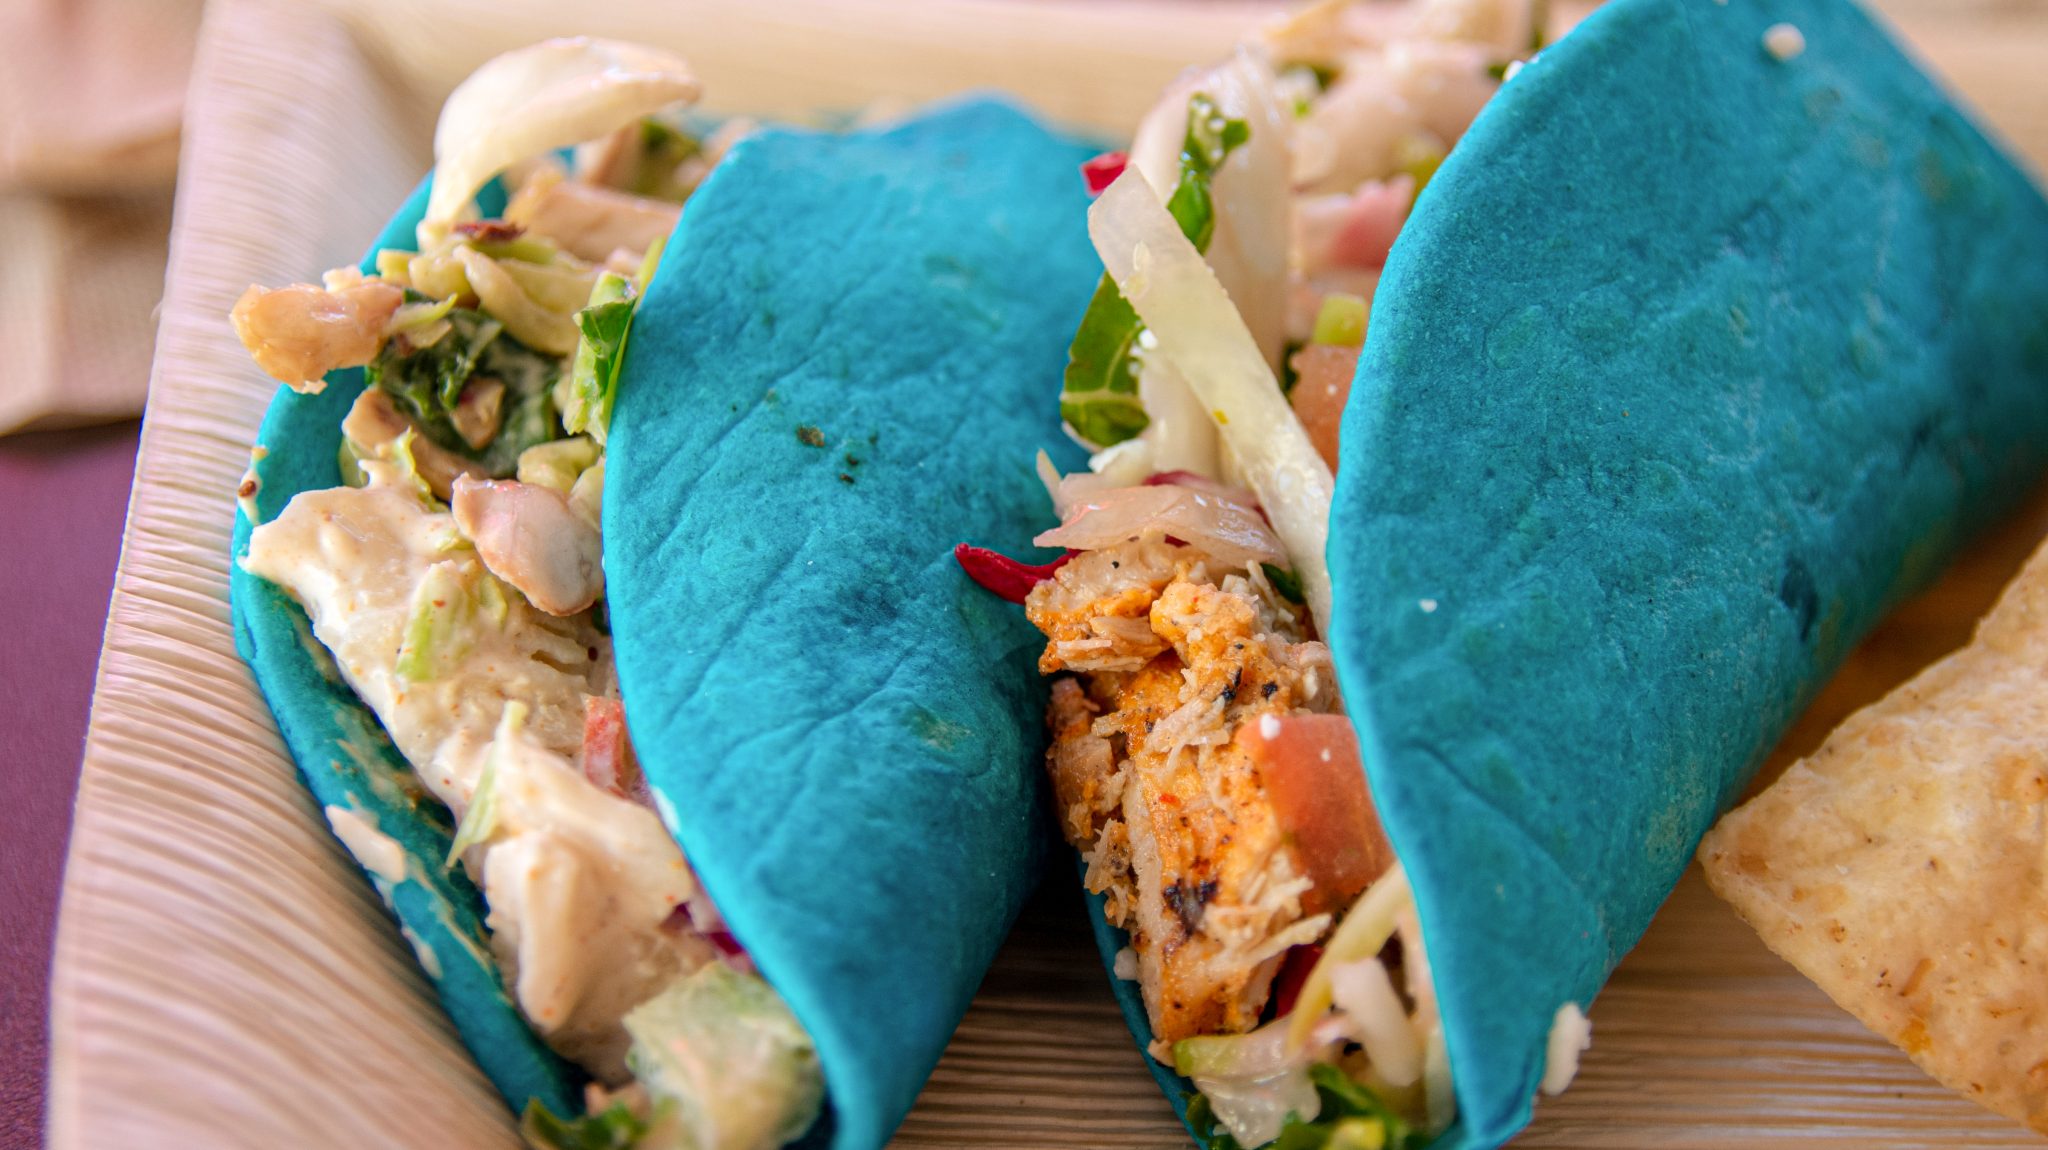 Close-up of two tacos with blue tortilla shells